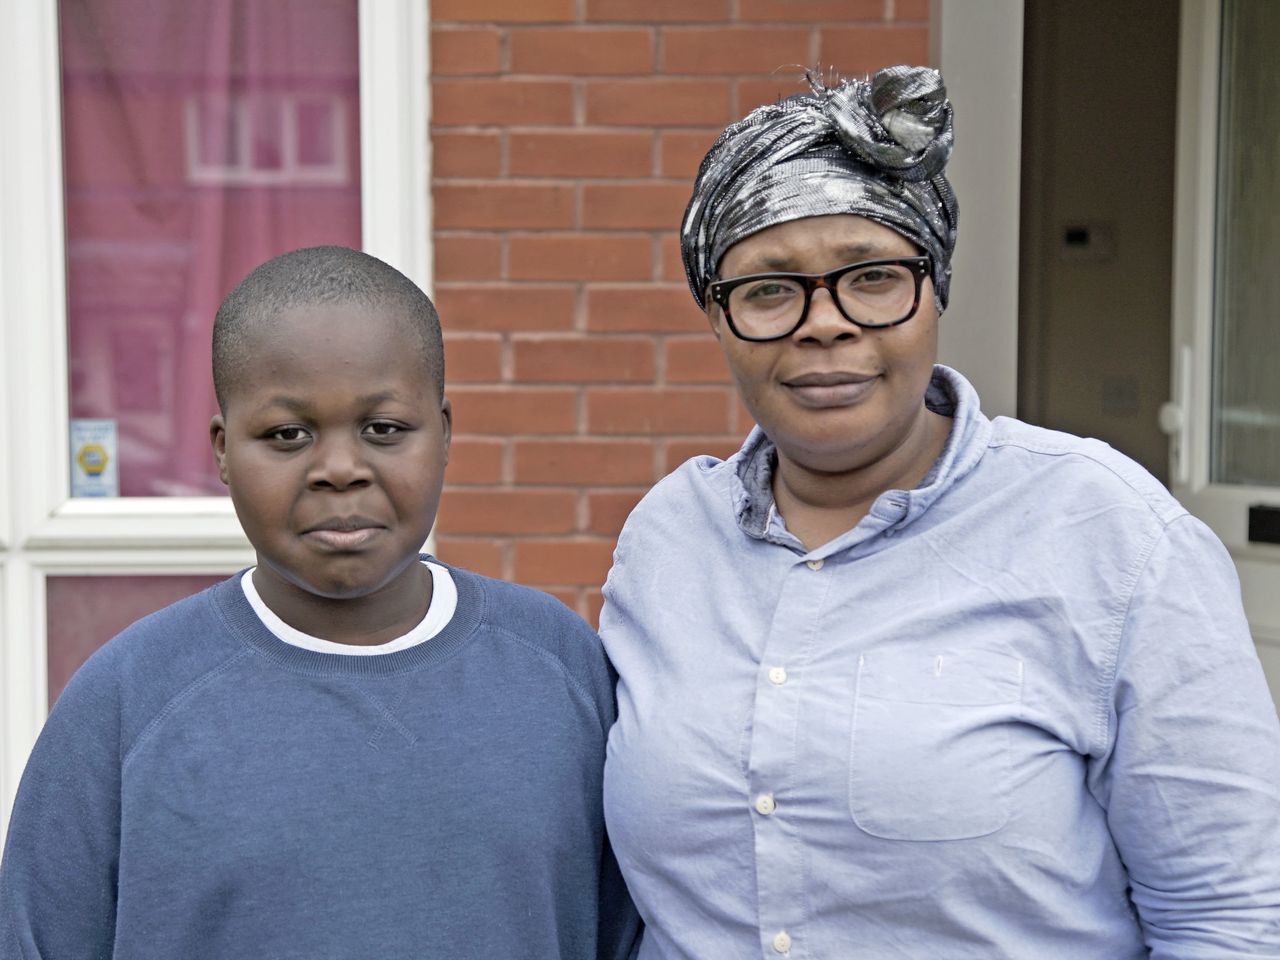 James and his mother Sarah. James was born in the UK a decade ago, but has been denied free school meals because of his family's immigration status.